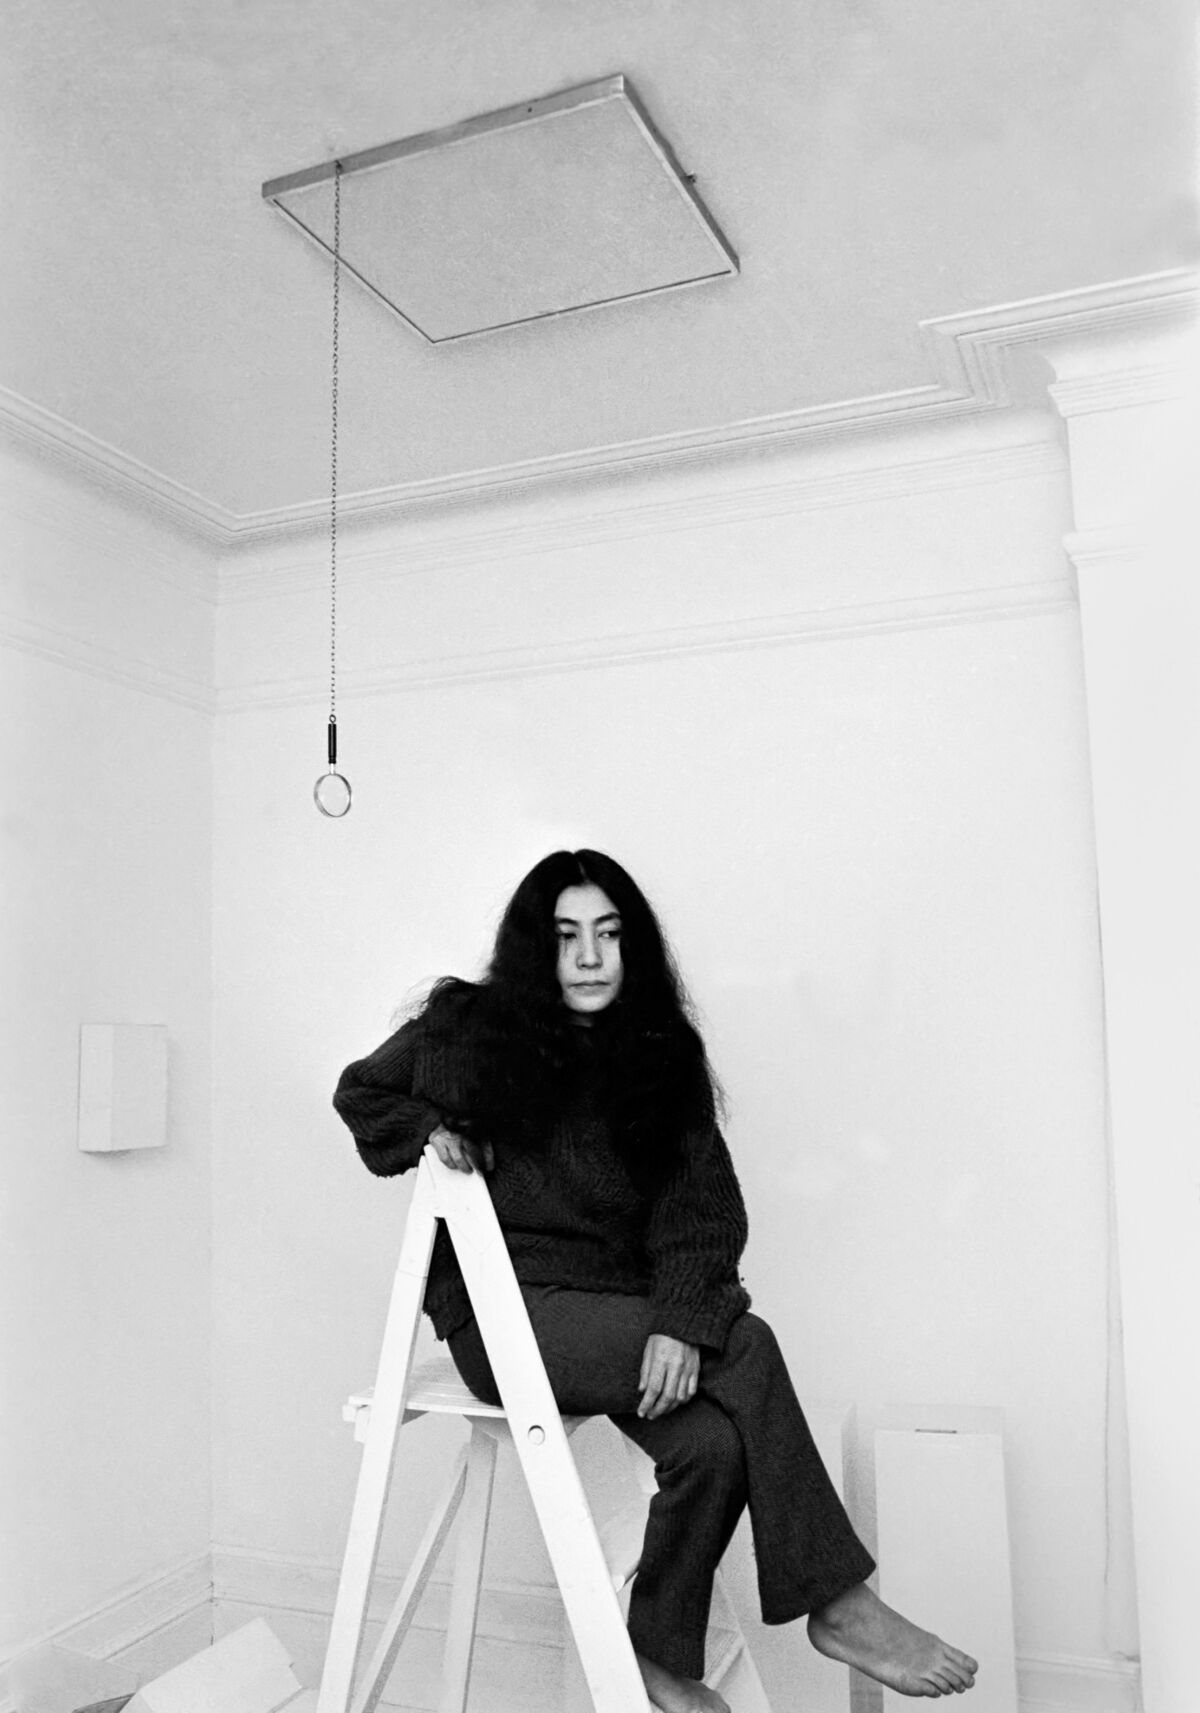 A black-and-white photograph of a woman with long hair sitting on a ladder.